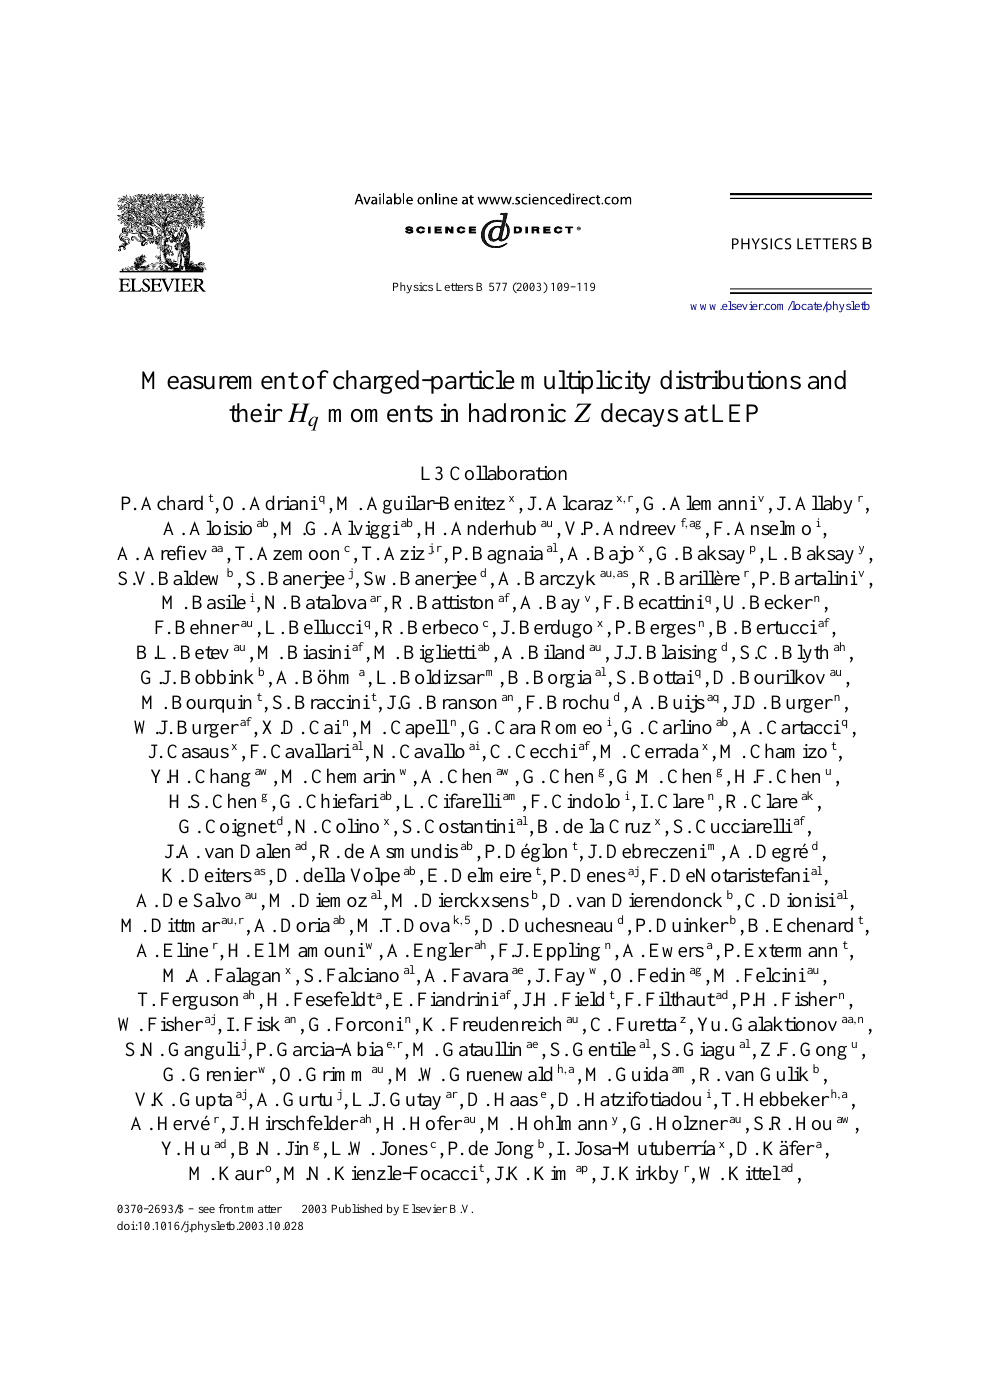 Measurement Of Charged Particle Multiplicity Distributions And Their Hq Moments In Hadronic Z Decays At Lep Topic Of Research Paper In Physical Sciences Download Scholarly Article Pdf And Read For Free On